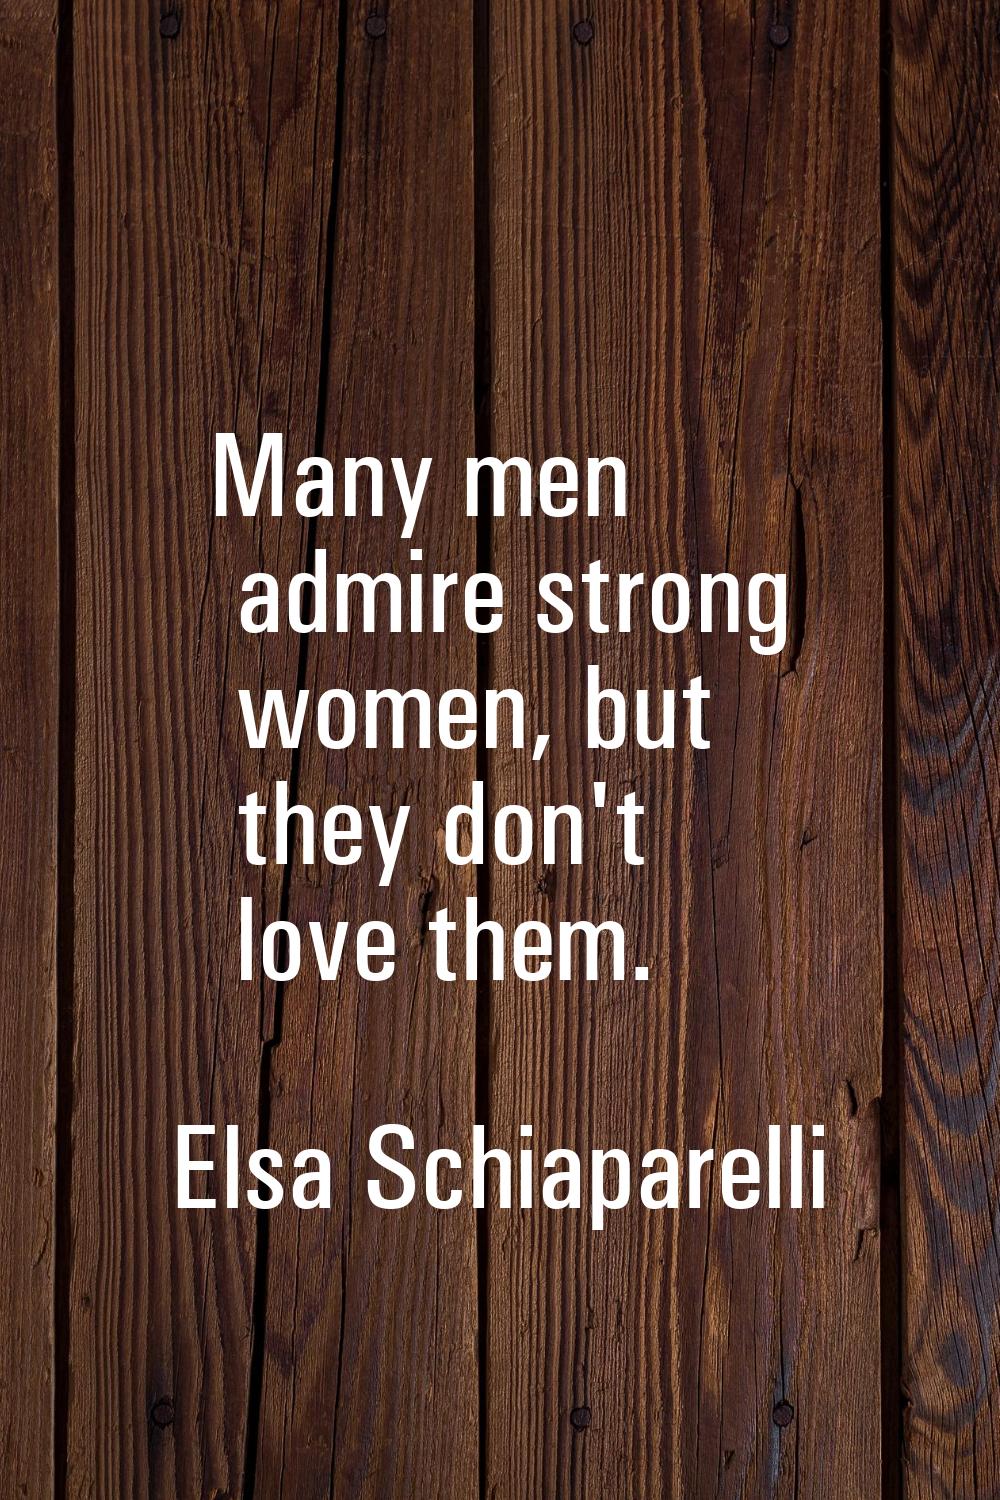 Many men admire strong women, but they don't love them.